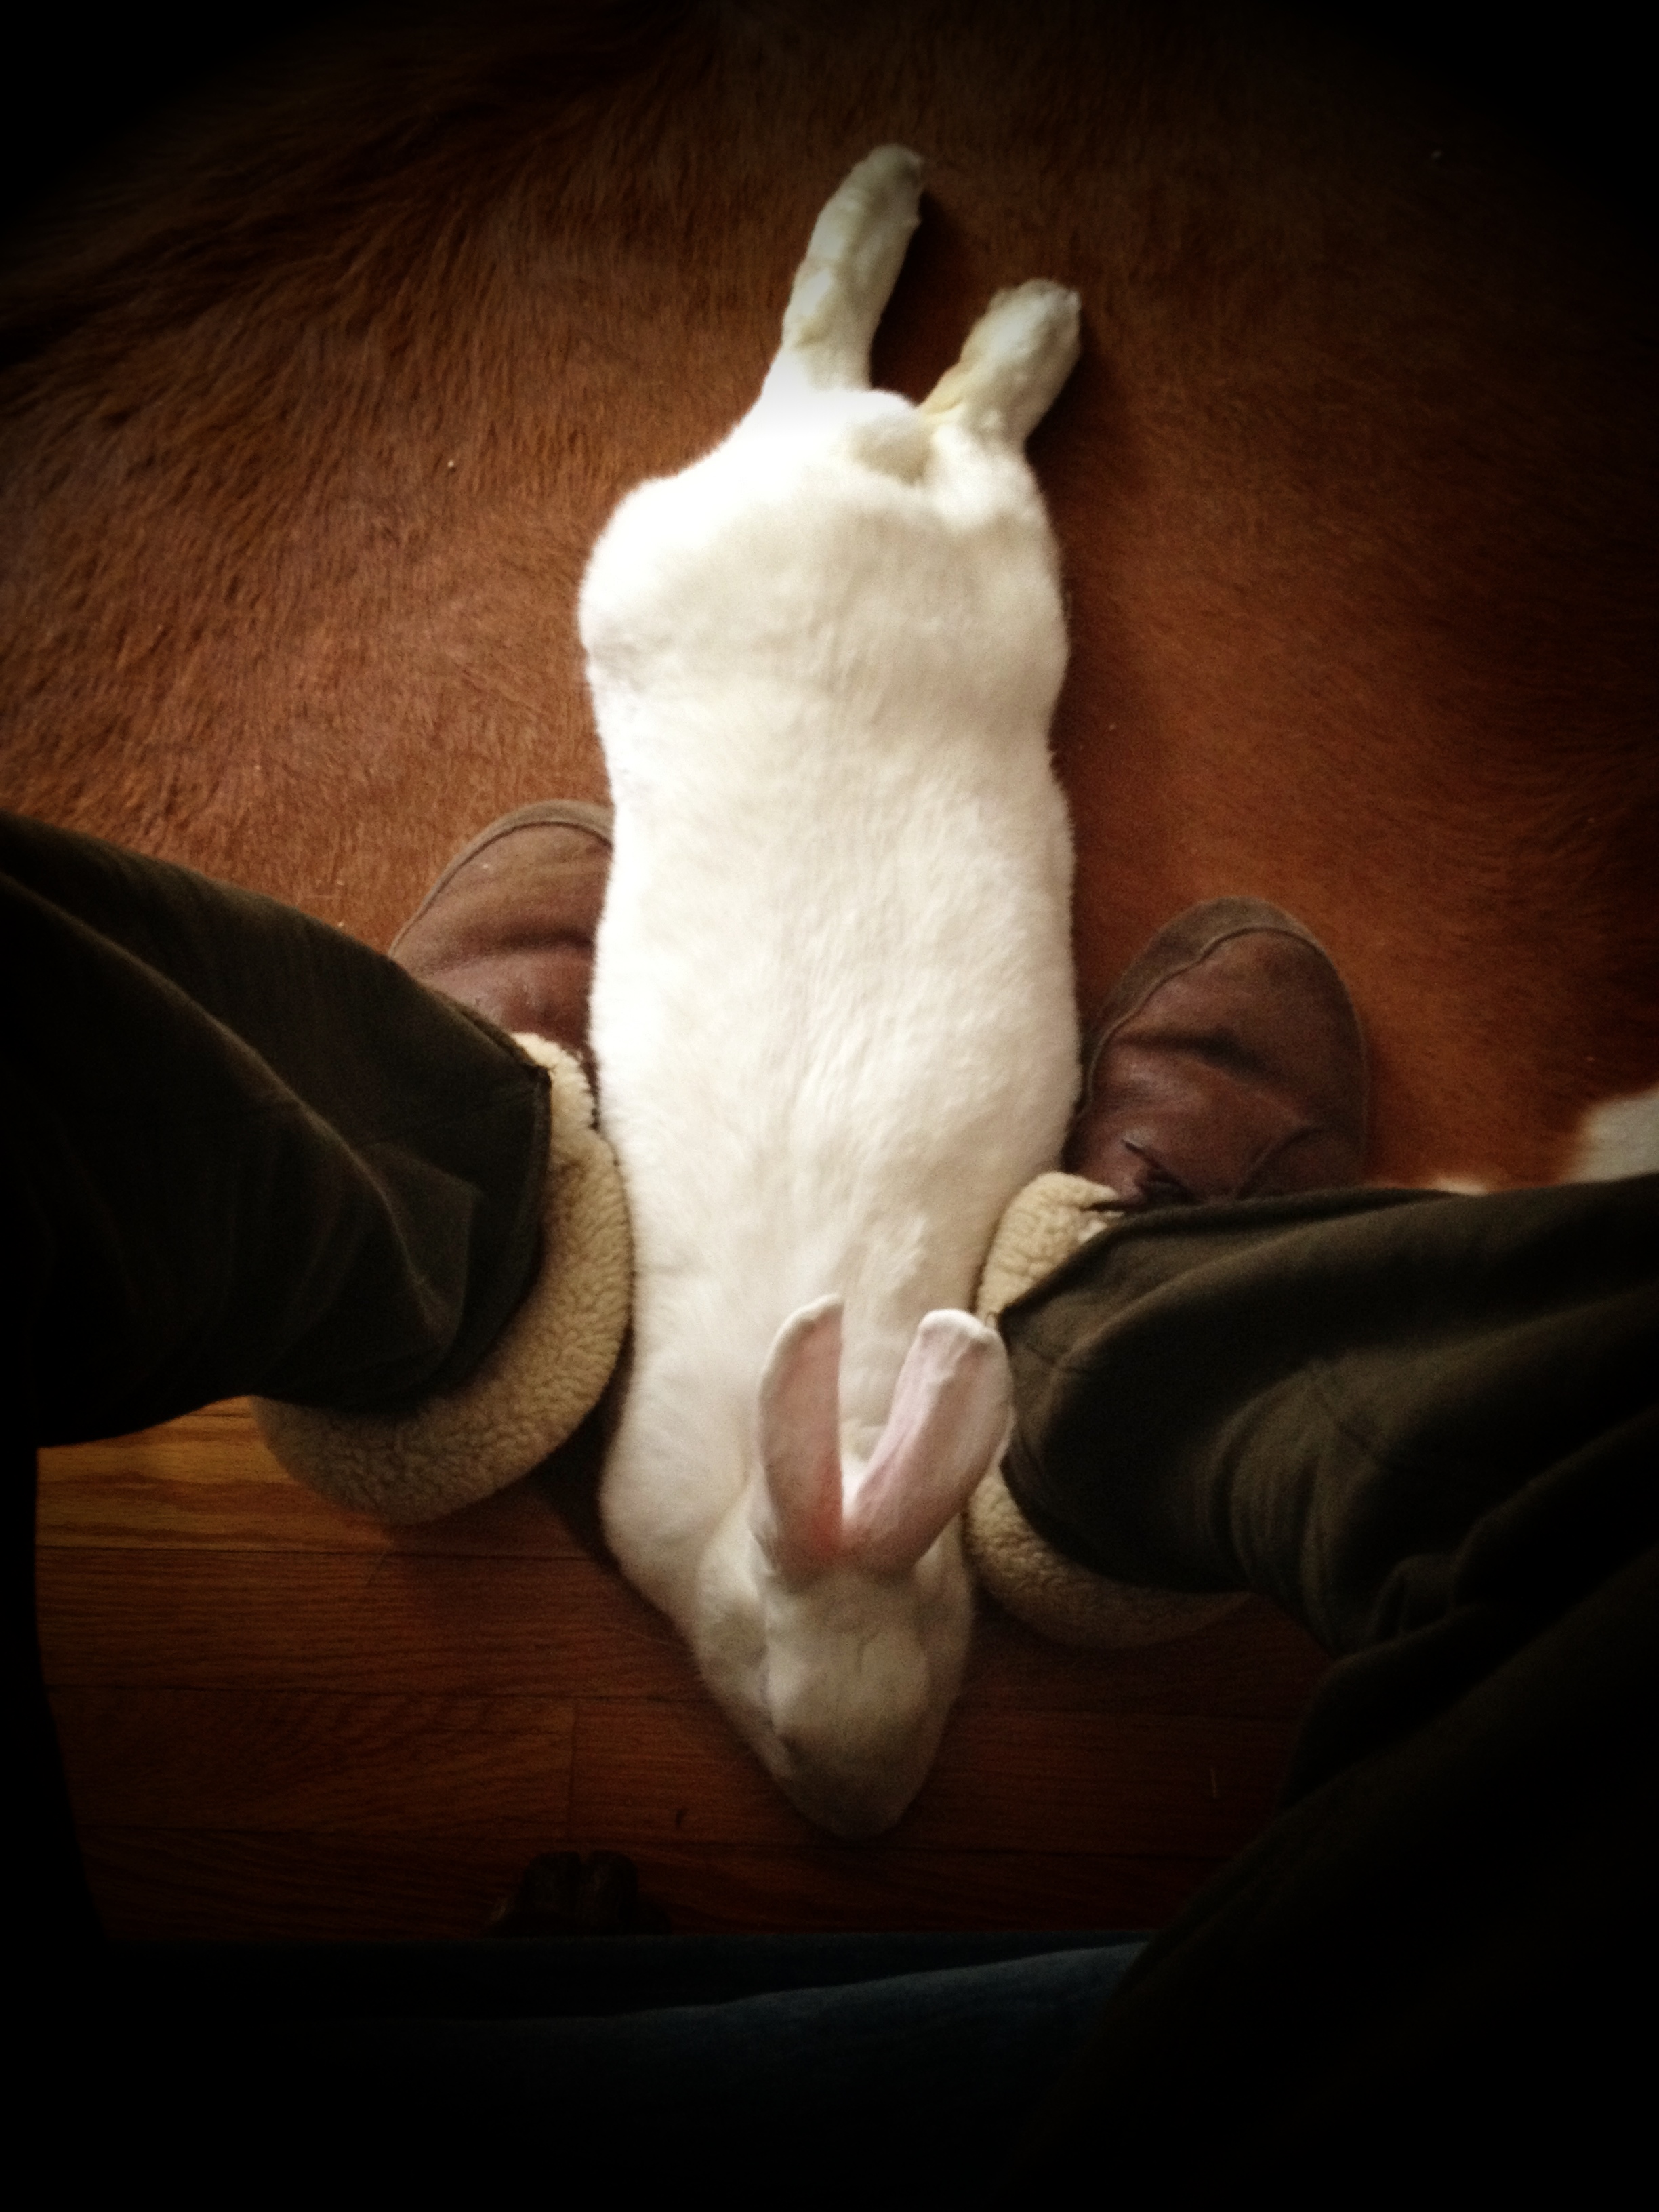 Bunny Slides Between Human's Feet for Some Rubbings 2